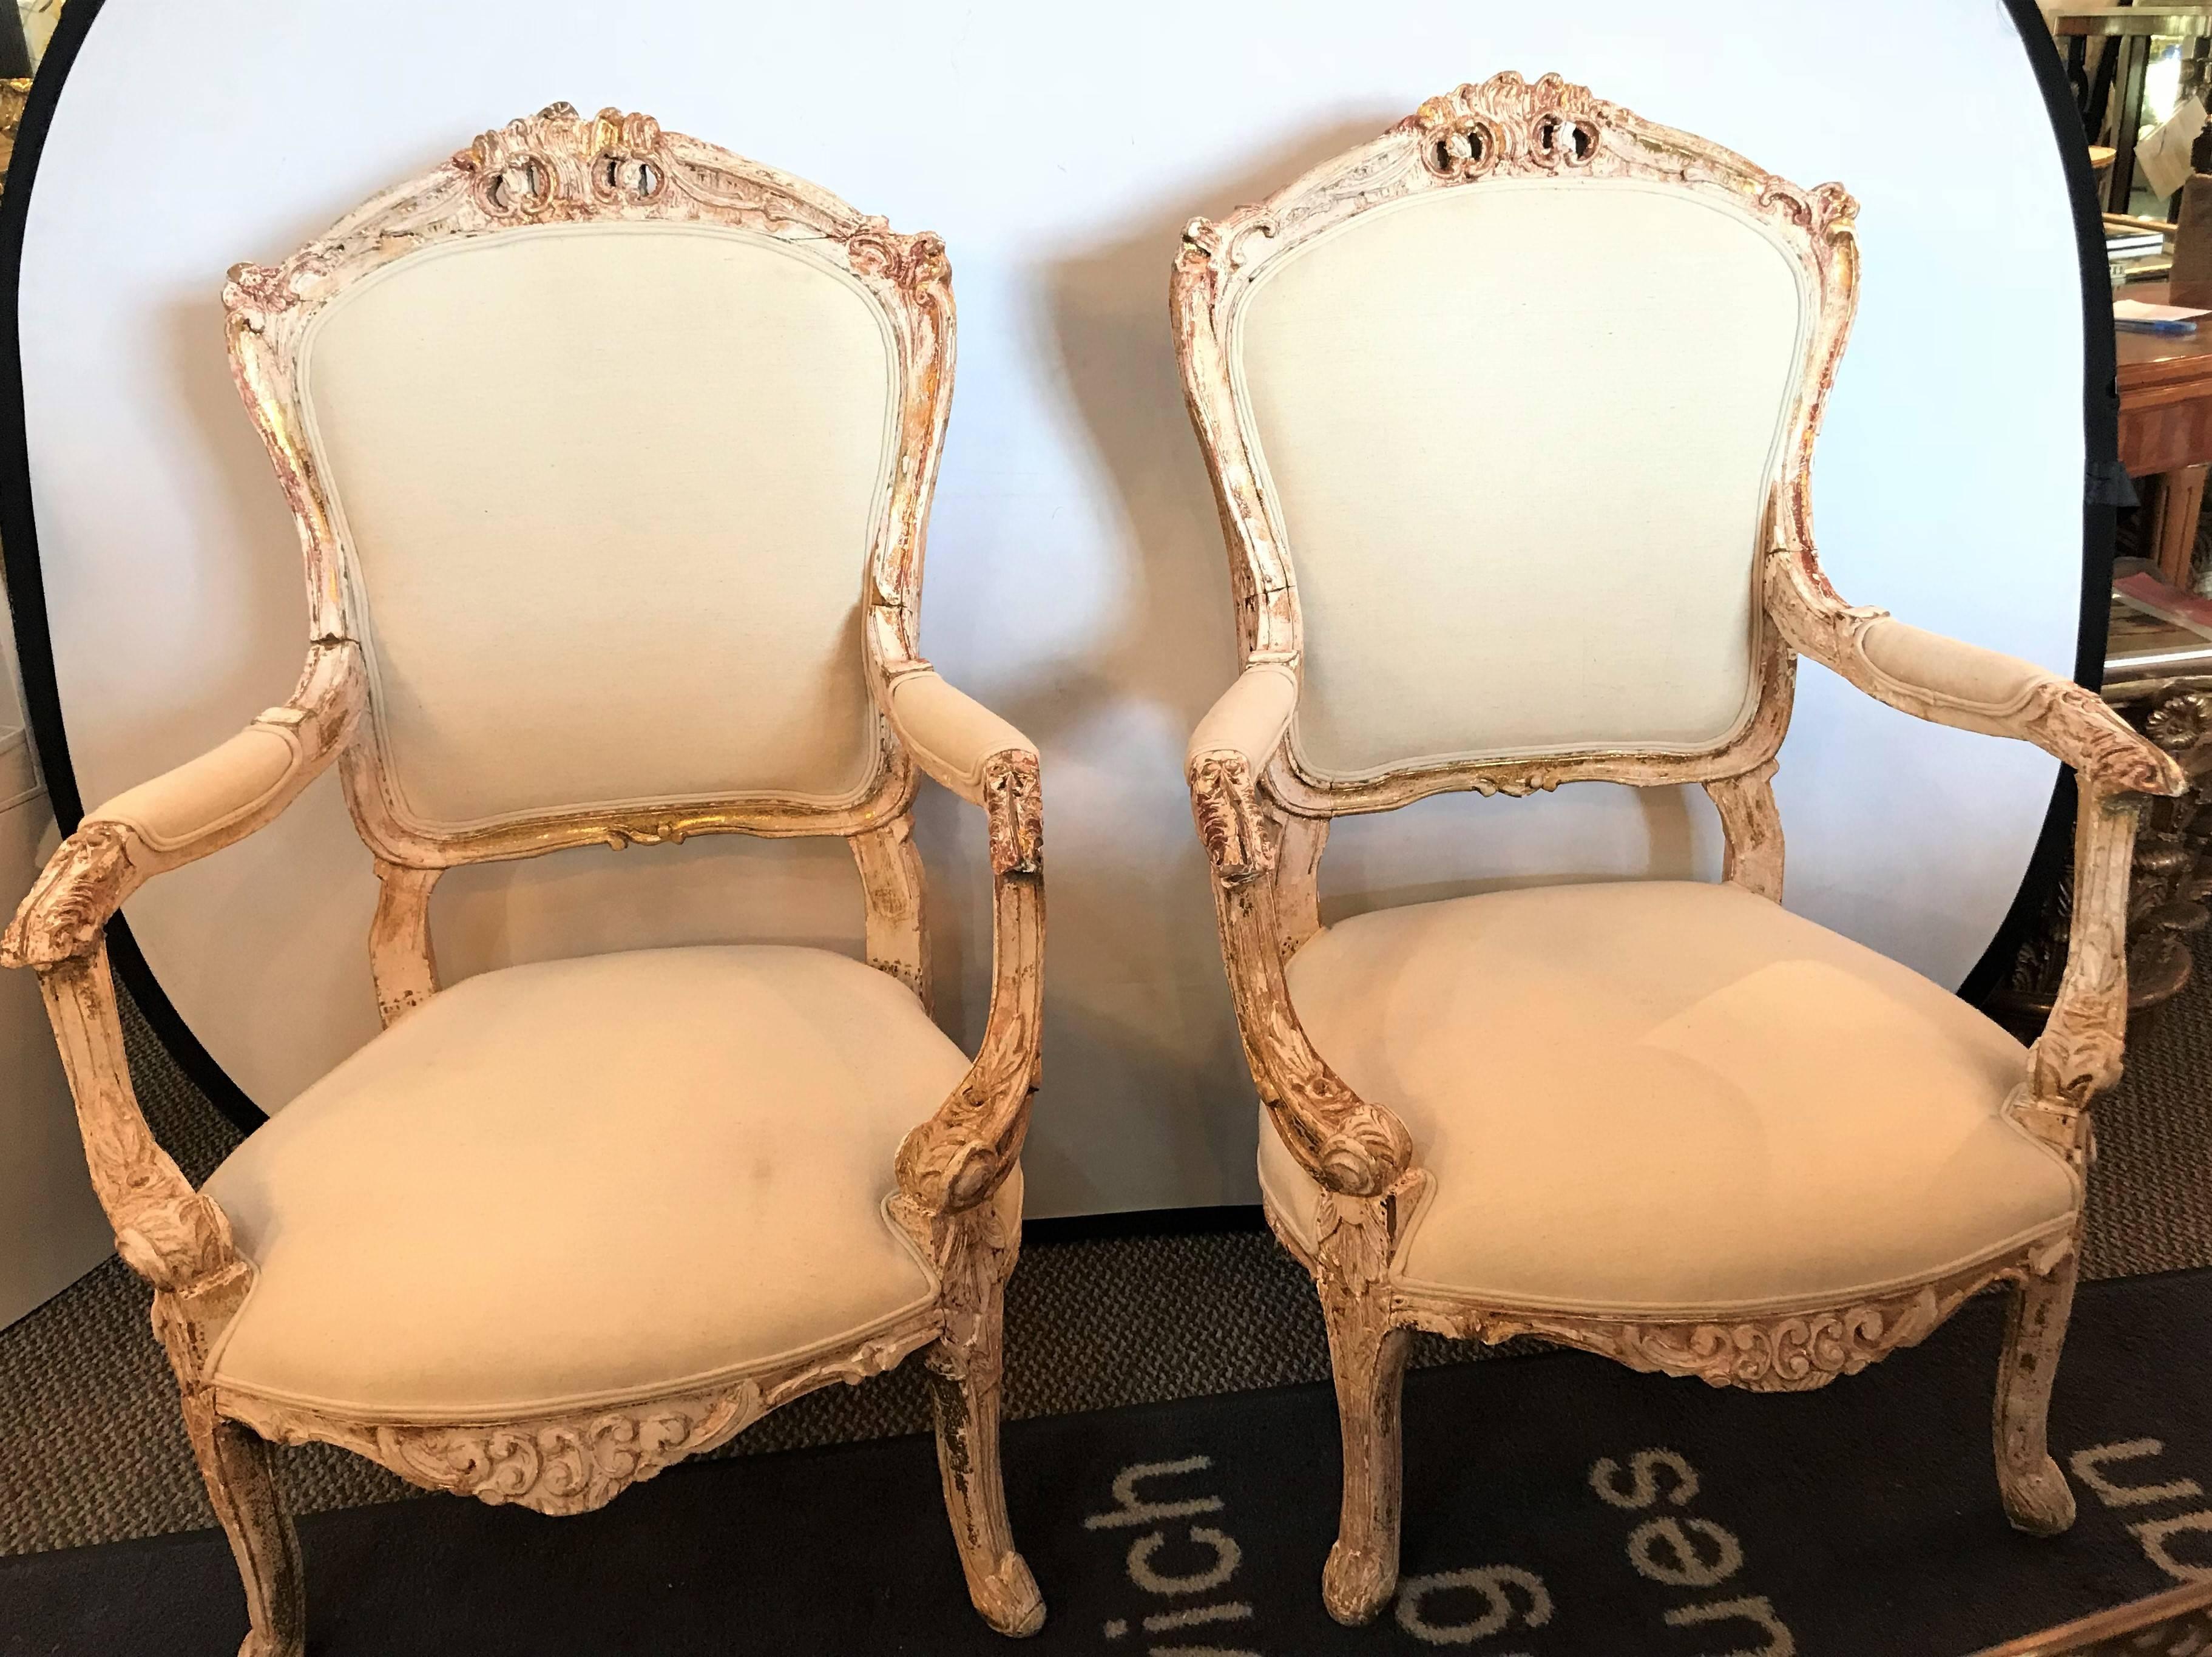 A pair of antique Louis XV style armchairs in painted distressed frames. Each having a wonderful antique frame that has been washed with new burlap upholstery. 
Lxx.